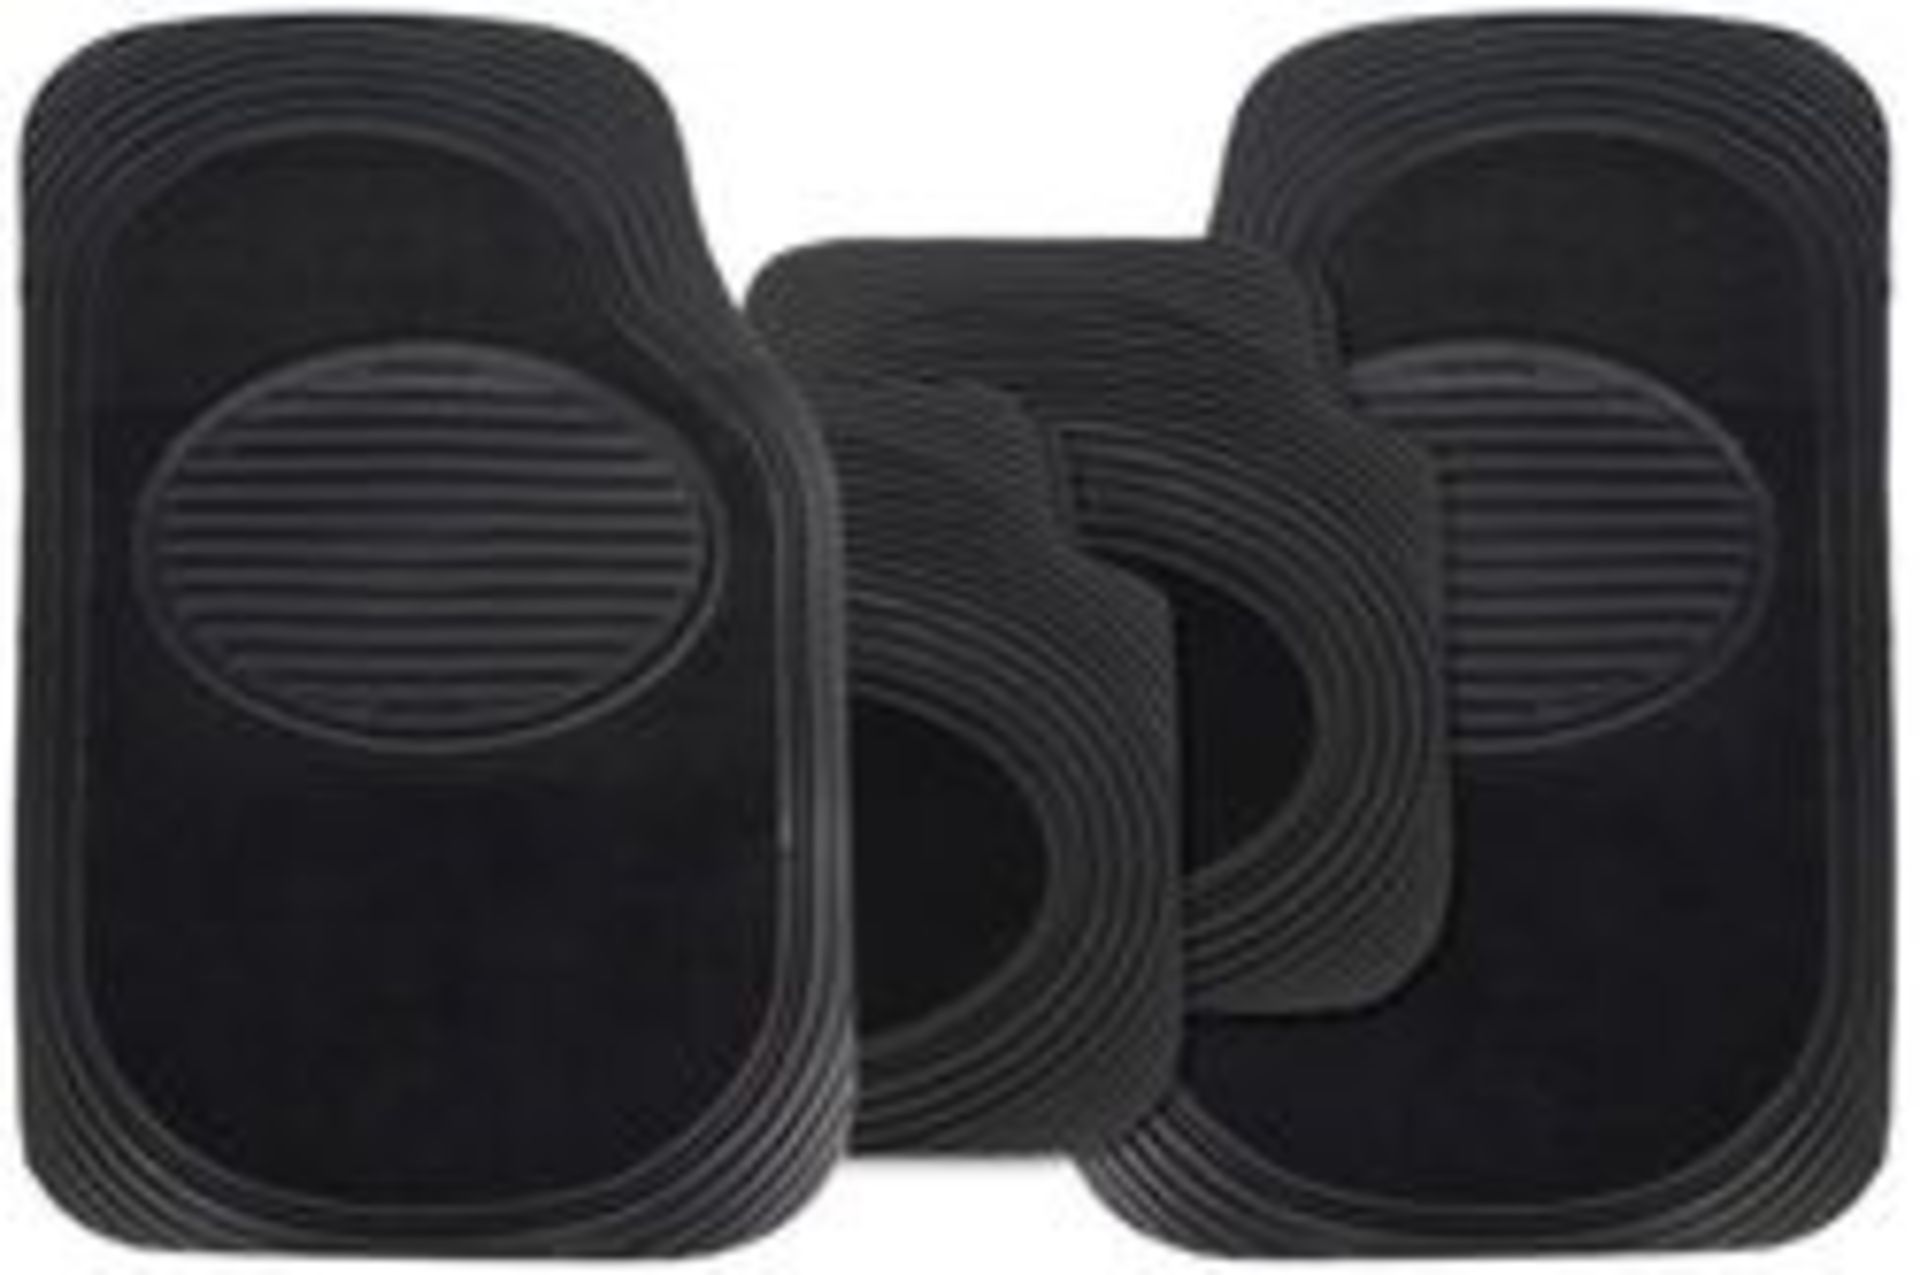 6 x sets - brand new Streetwize Allure Heavy Duty Rubber and carpet universal Mat set - rrp £19.99 (